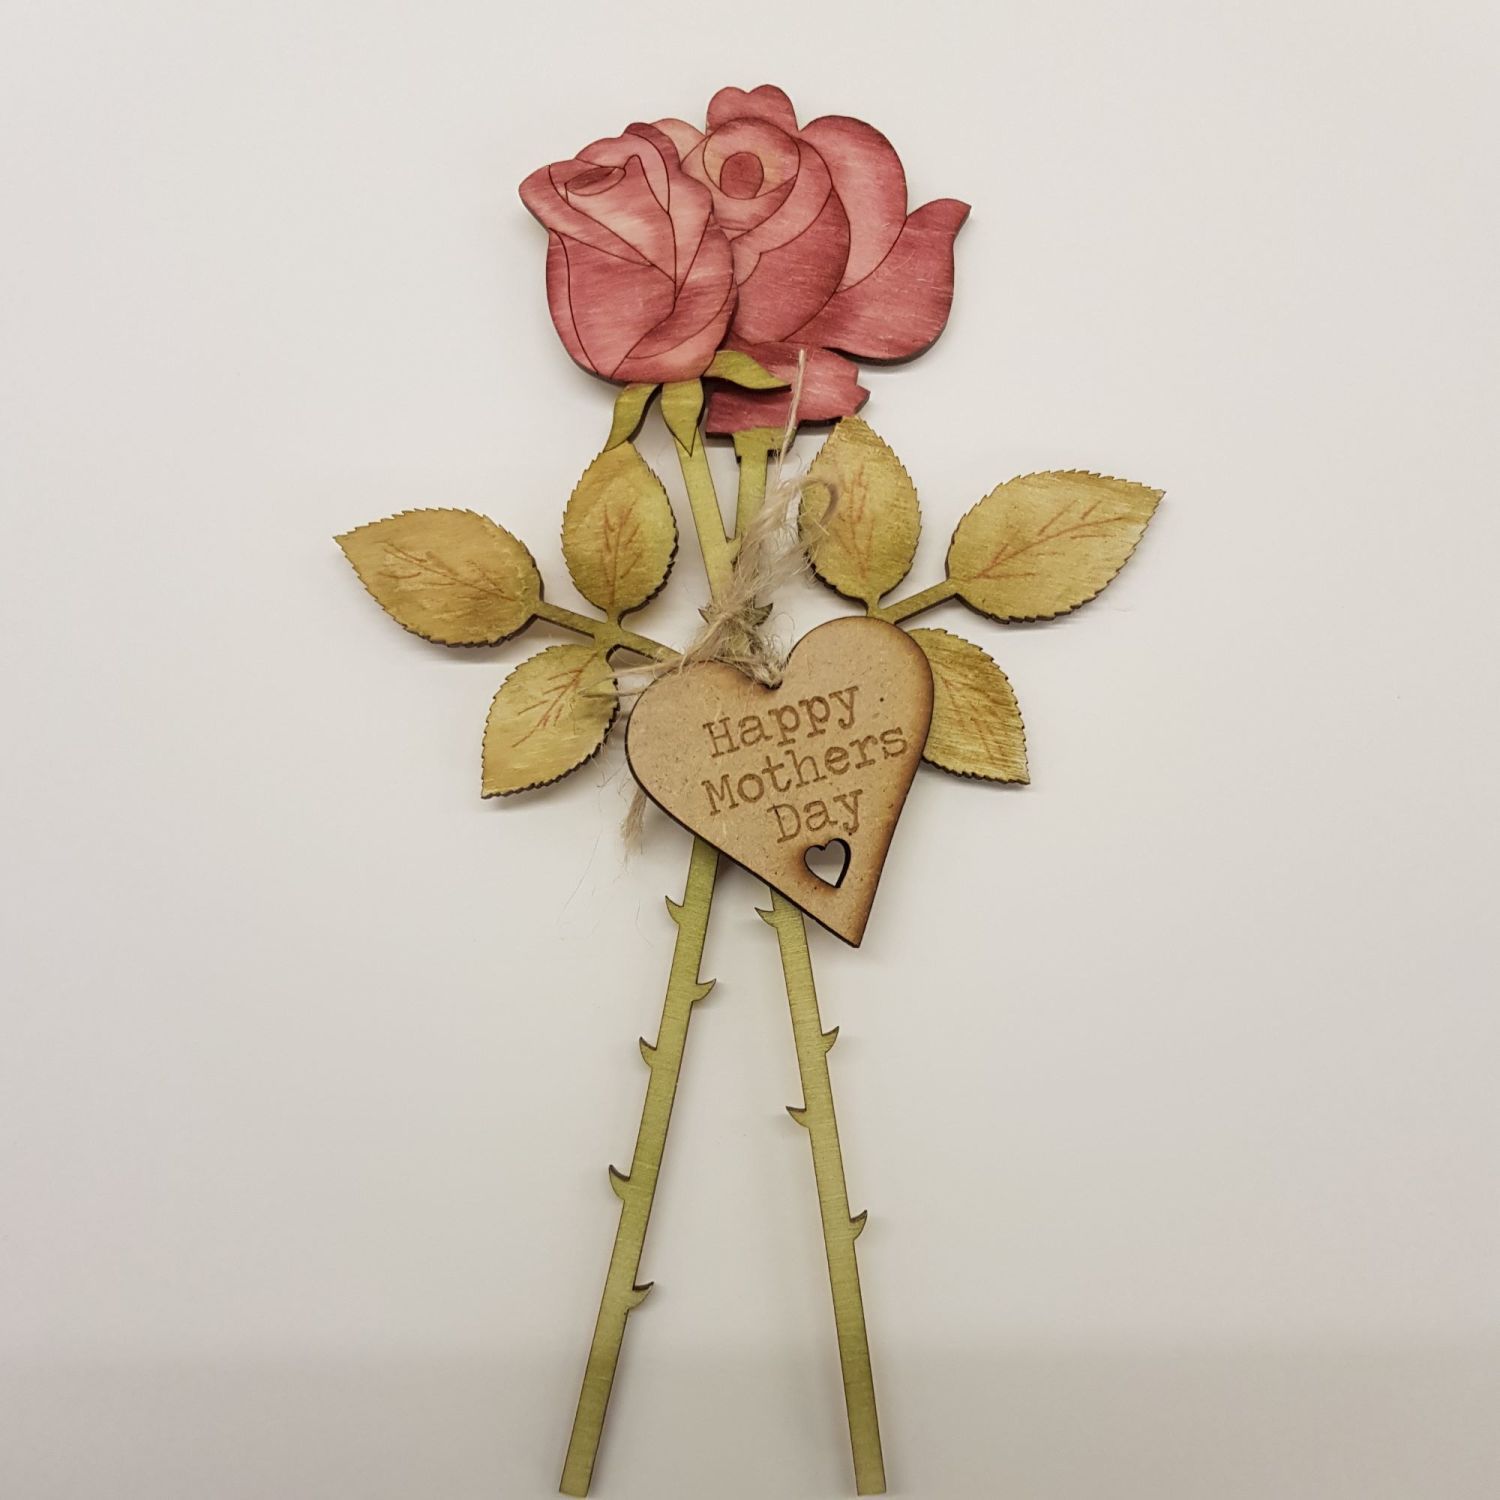 Laser cut and painted roses